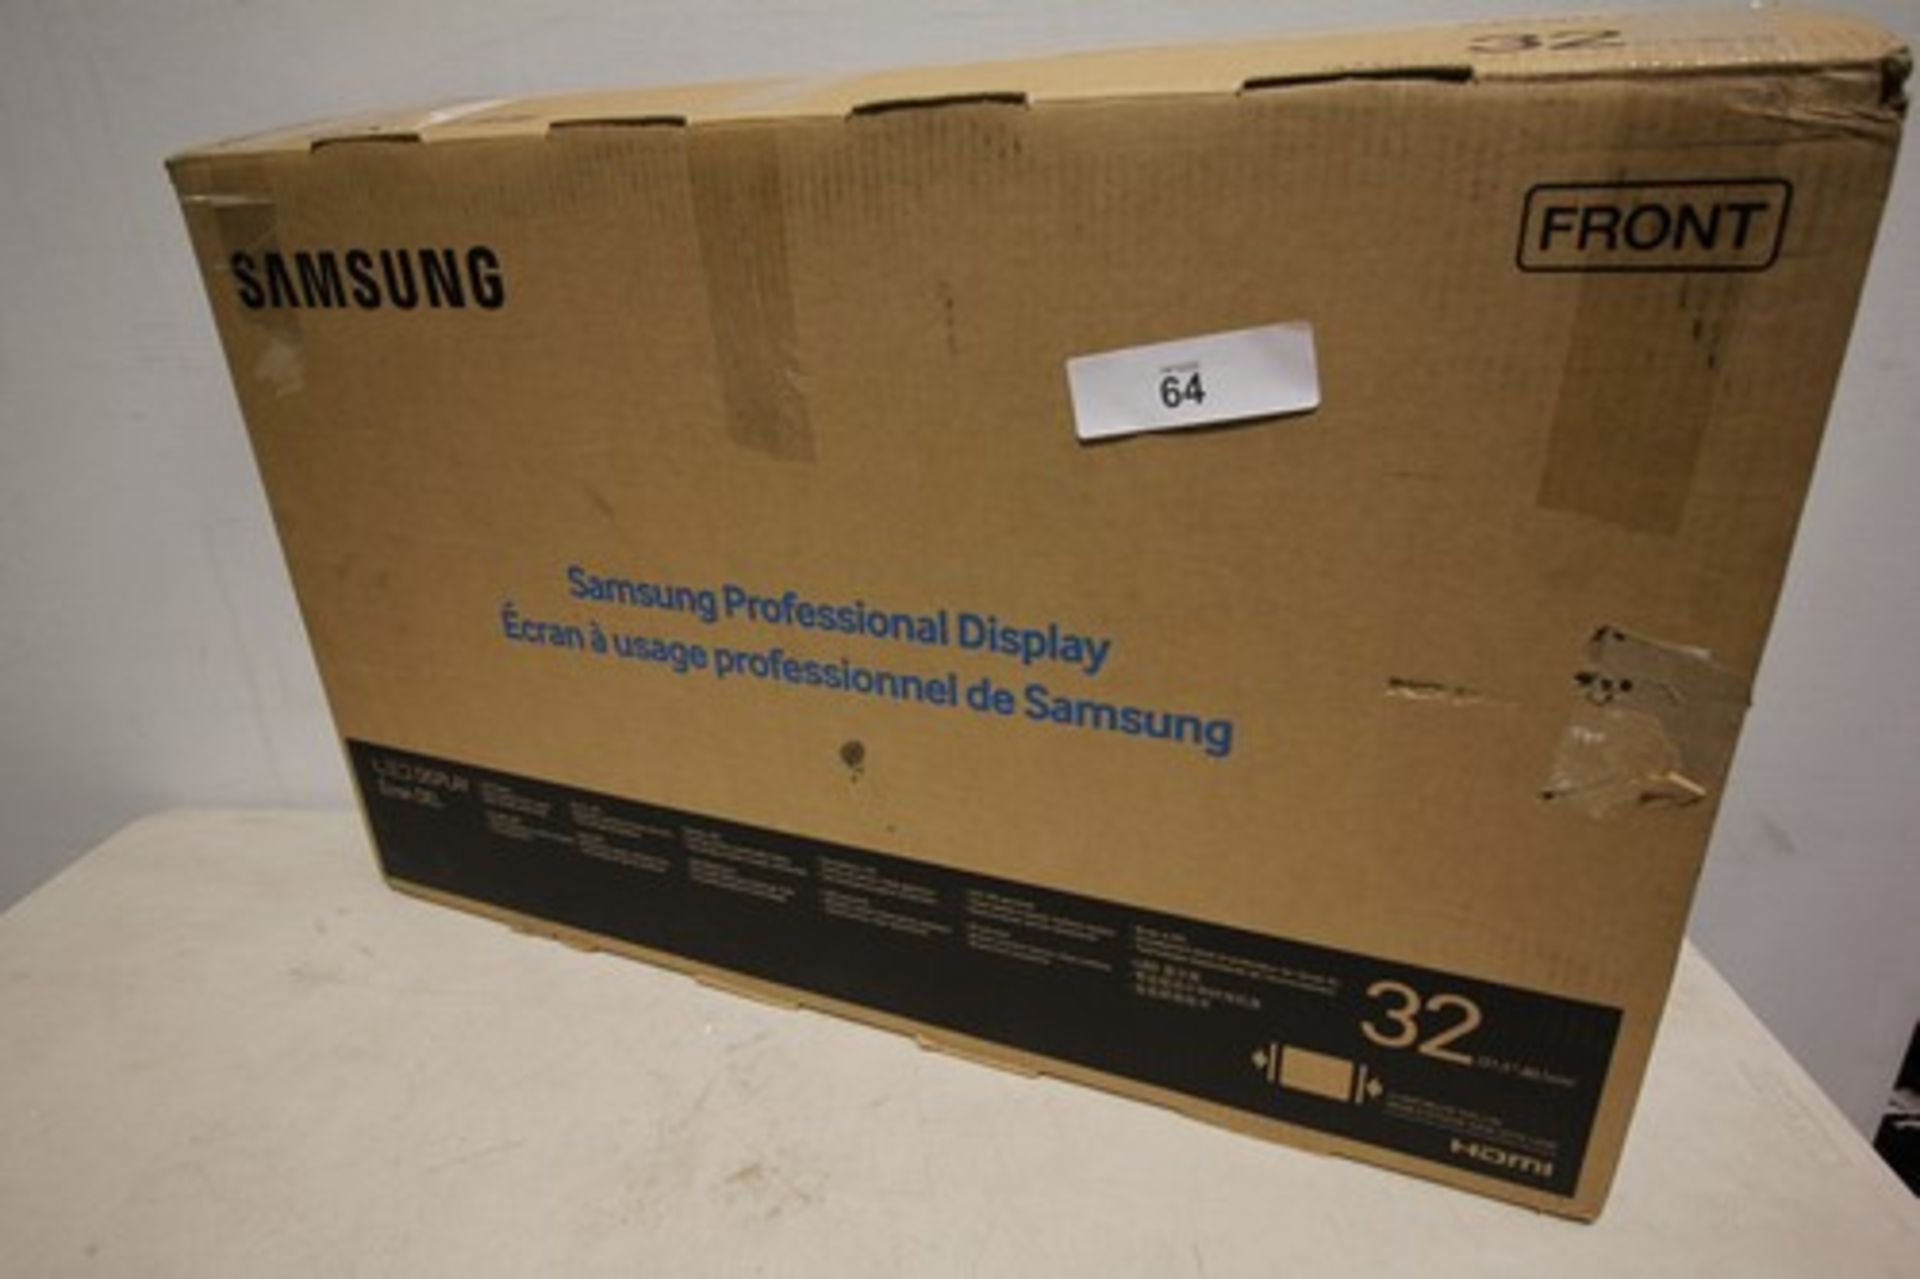 1 x Samsung 32" professional display TV, model DC32E, powers on ok but not fully tested - new in box - Image 2 of 3